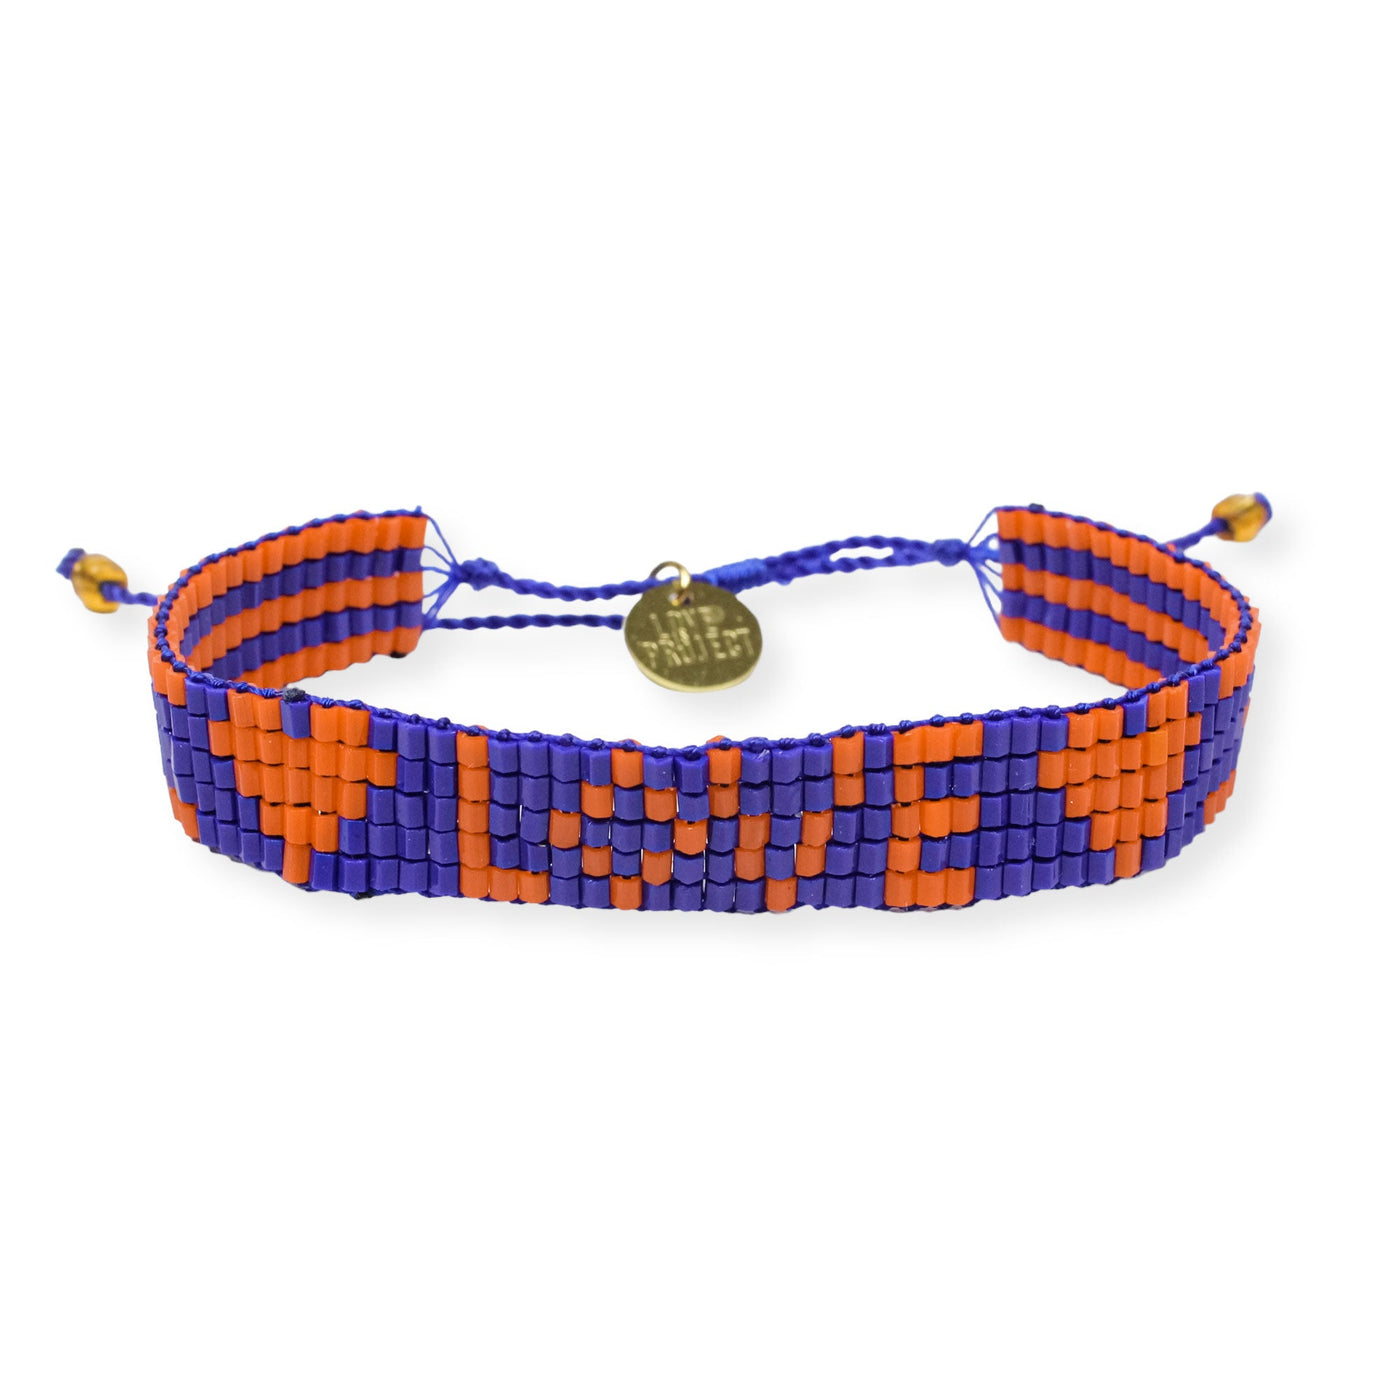 Seed Bead LOVE with Hearts Bracelet - Navy and Orange